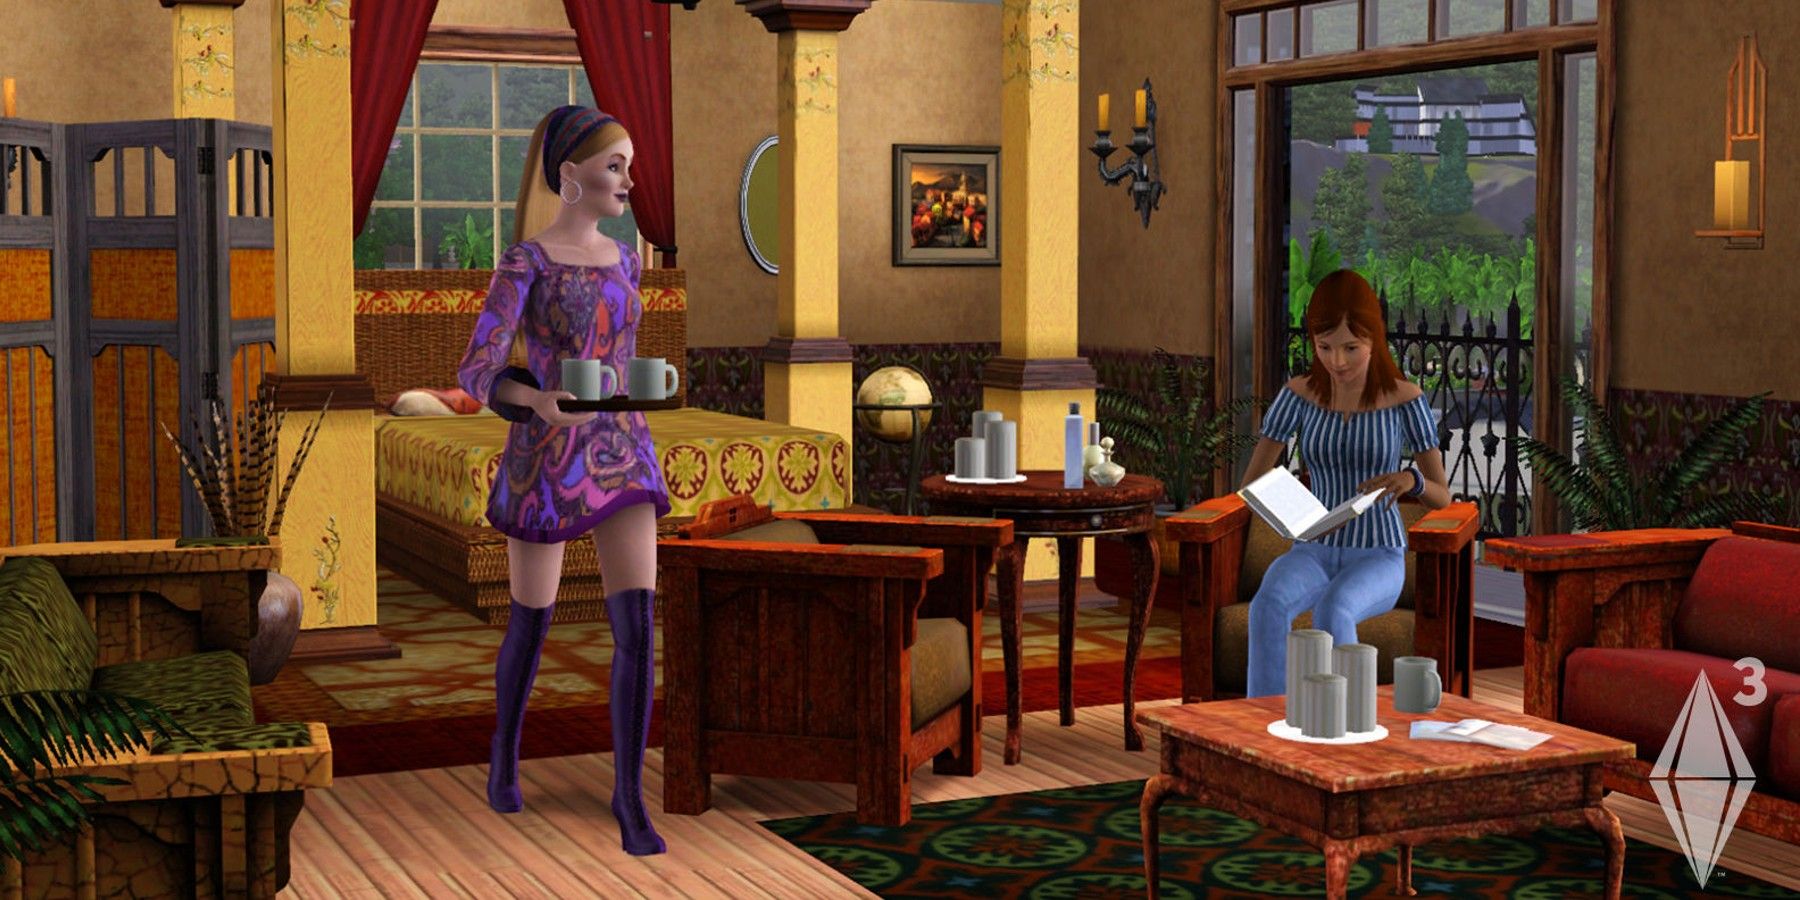 The Sims 3 promotional gameplay screenshot of two Sims drinking coffee indoors